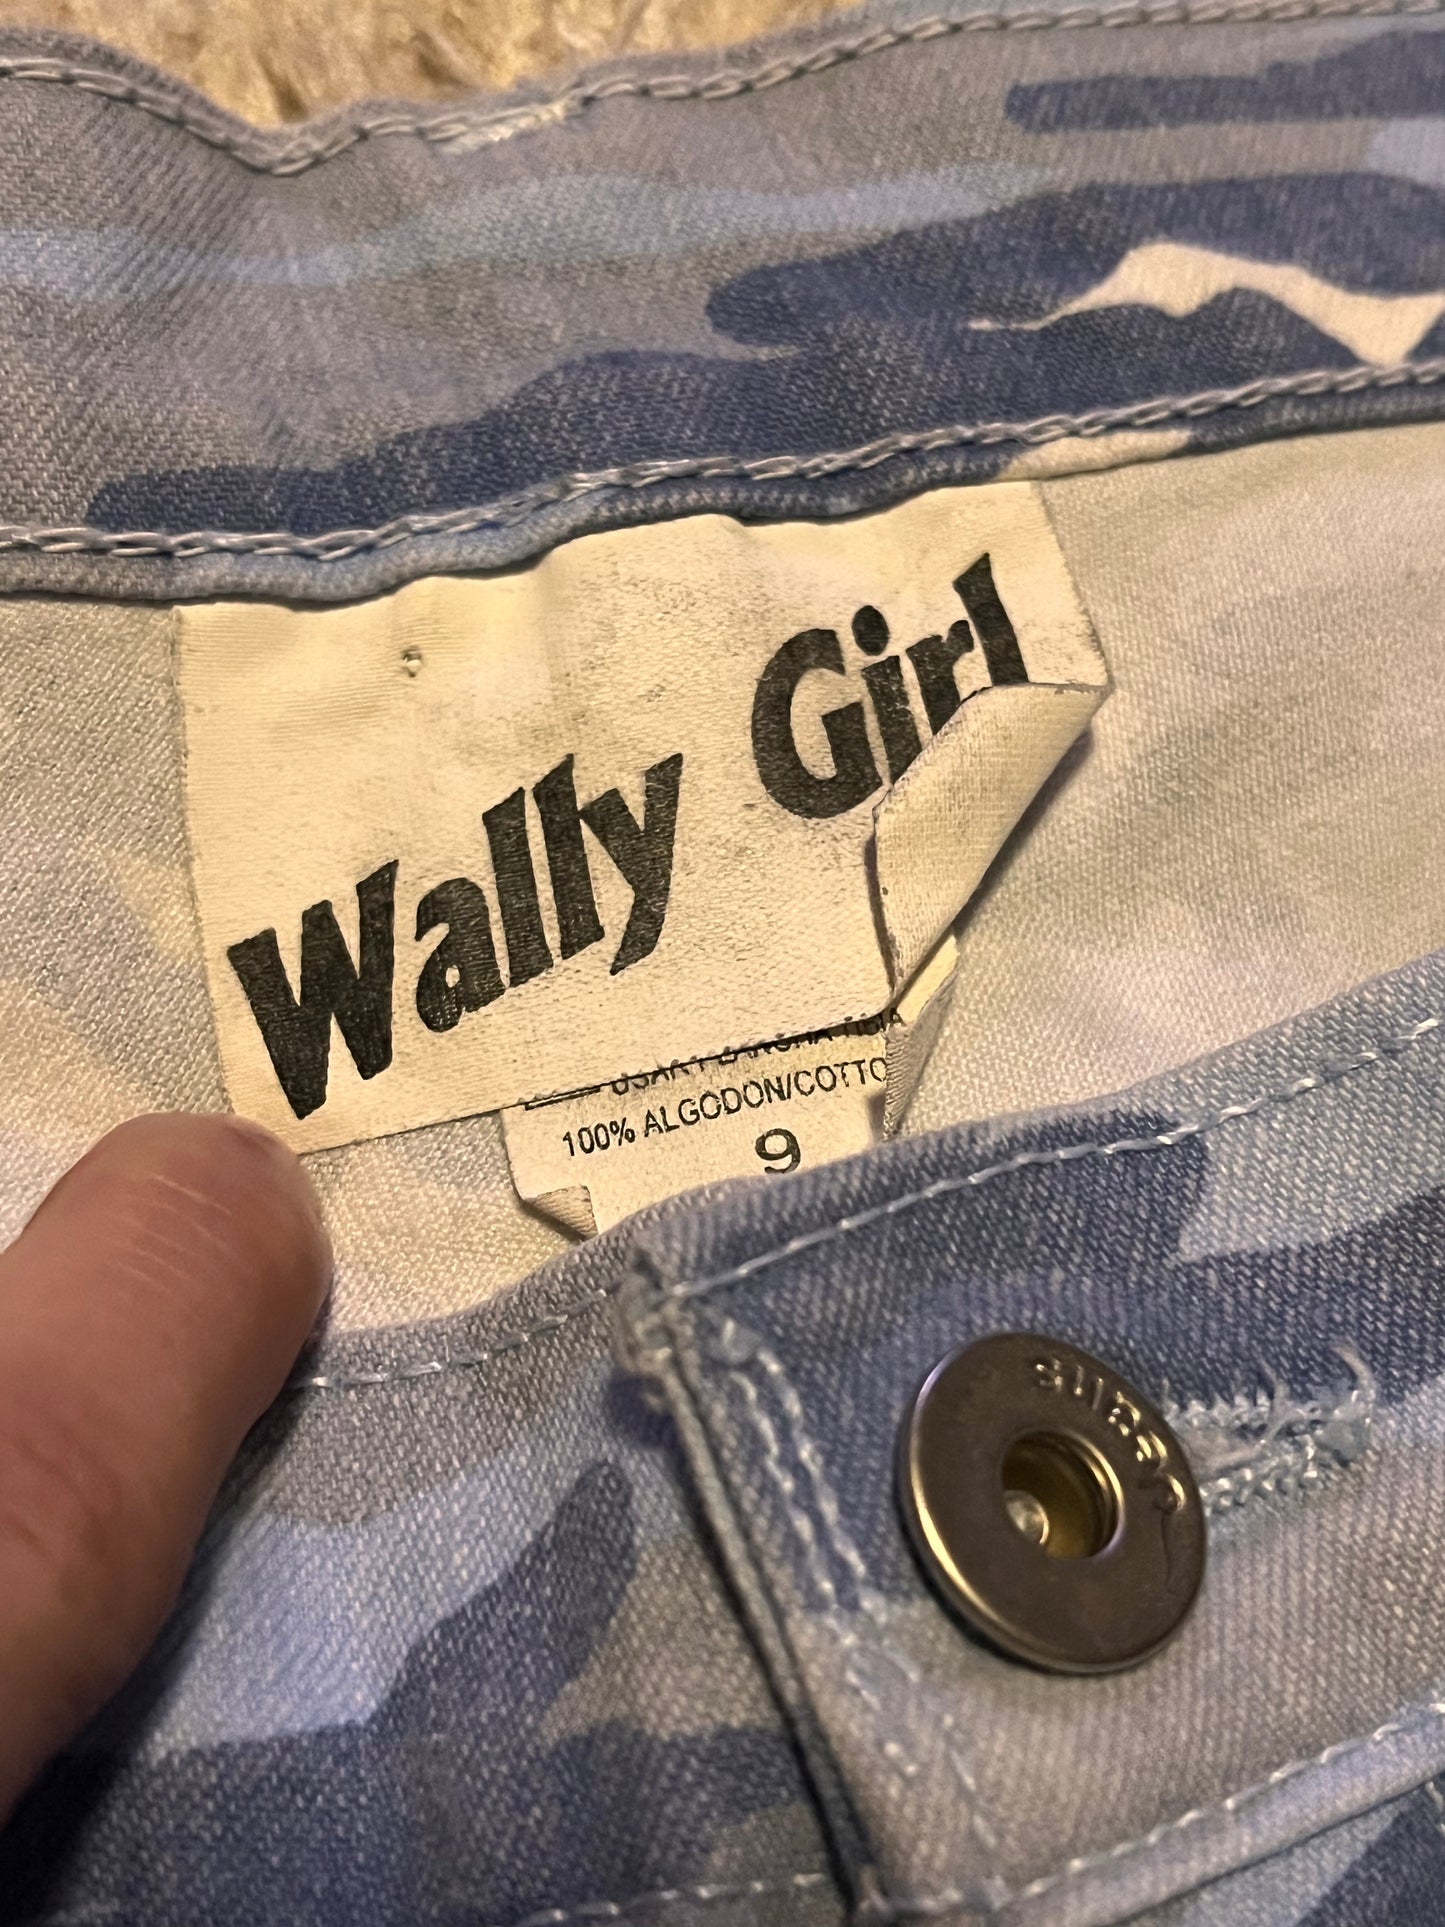 Vintage Y2K "Wally Girl" Blue & White Camouflage-Print Jeans